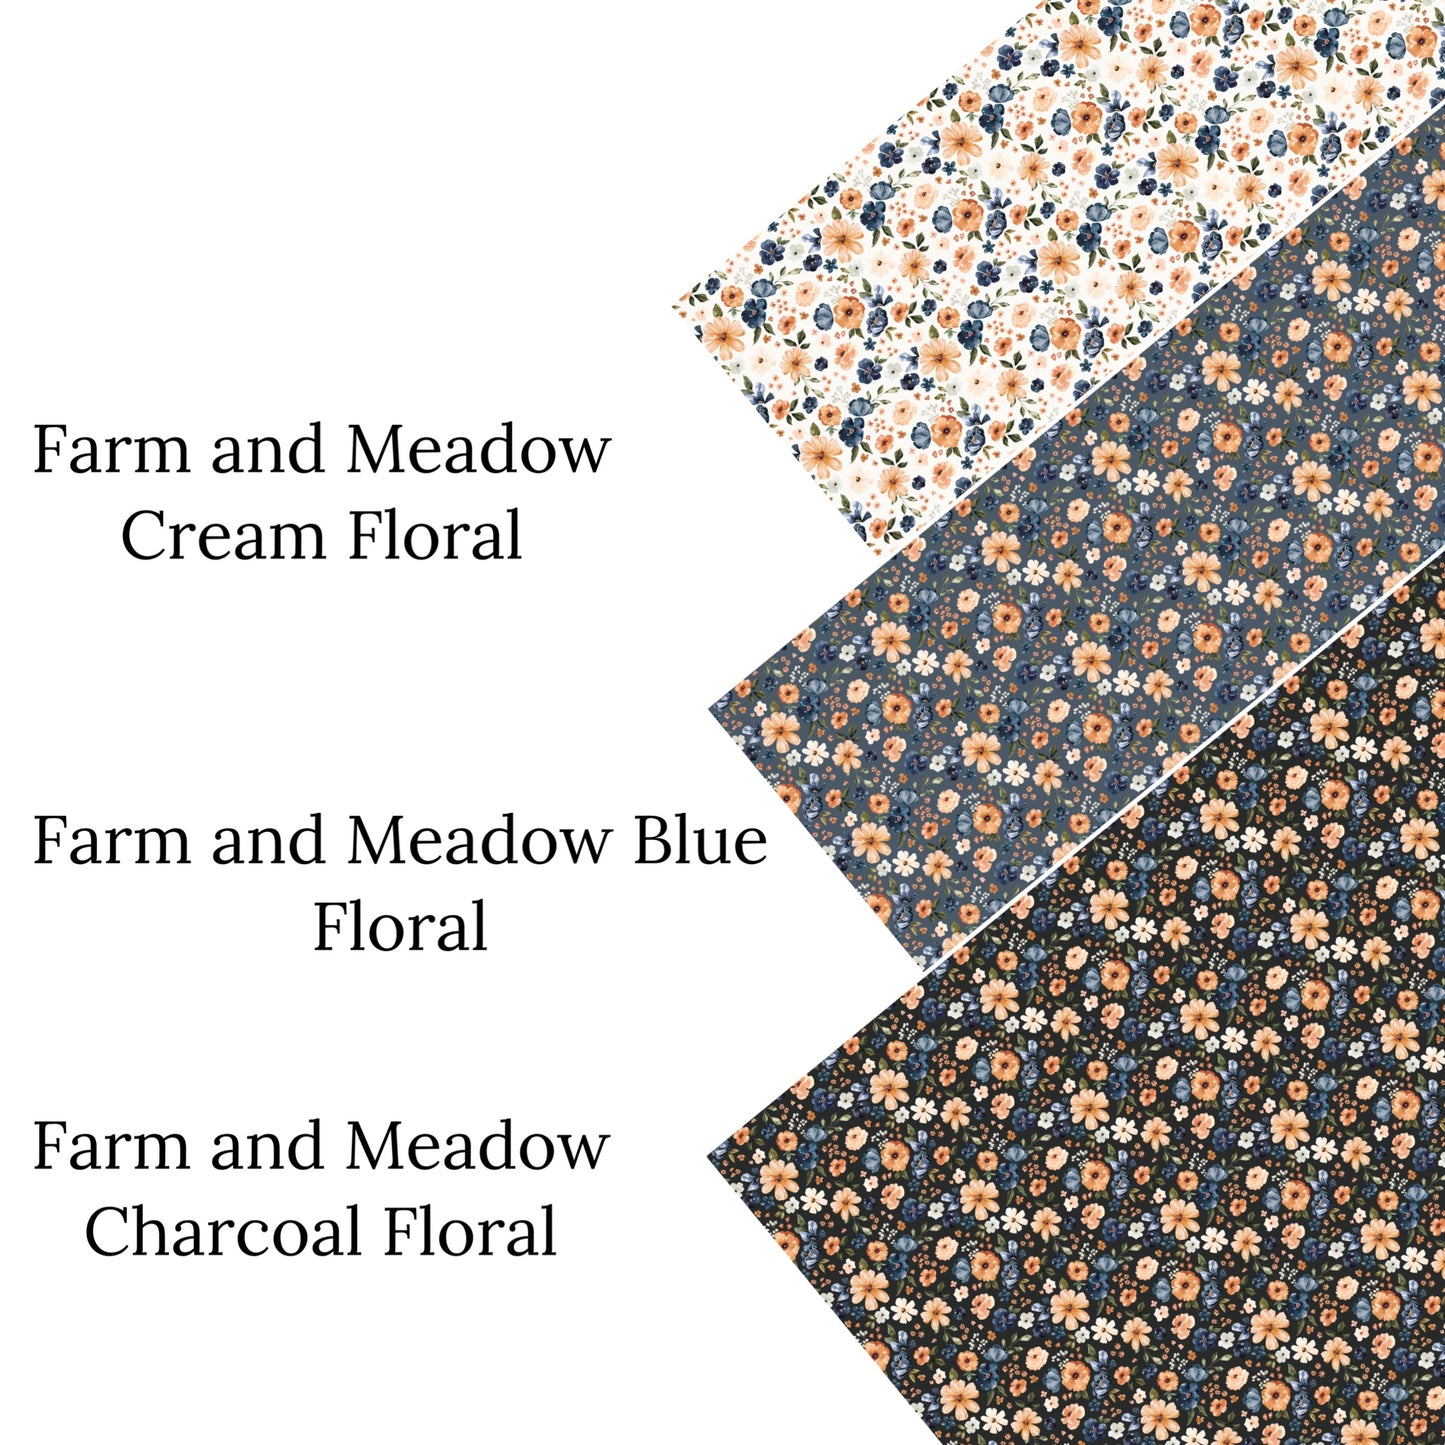 These spring and summer pattern fabric by the yard features farm and meadow country floral patterns. This fun fabric can be used for all your sewing and crafting needs!